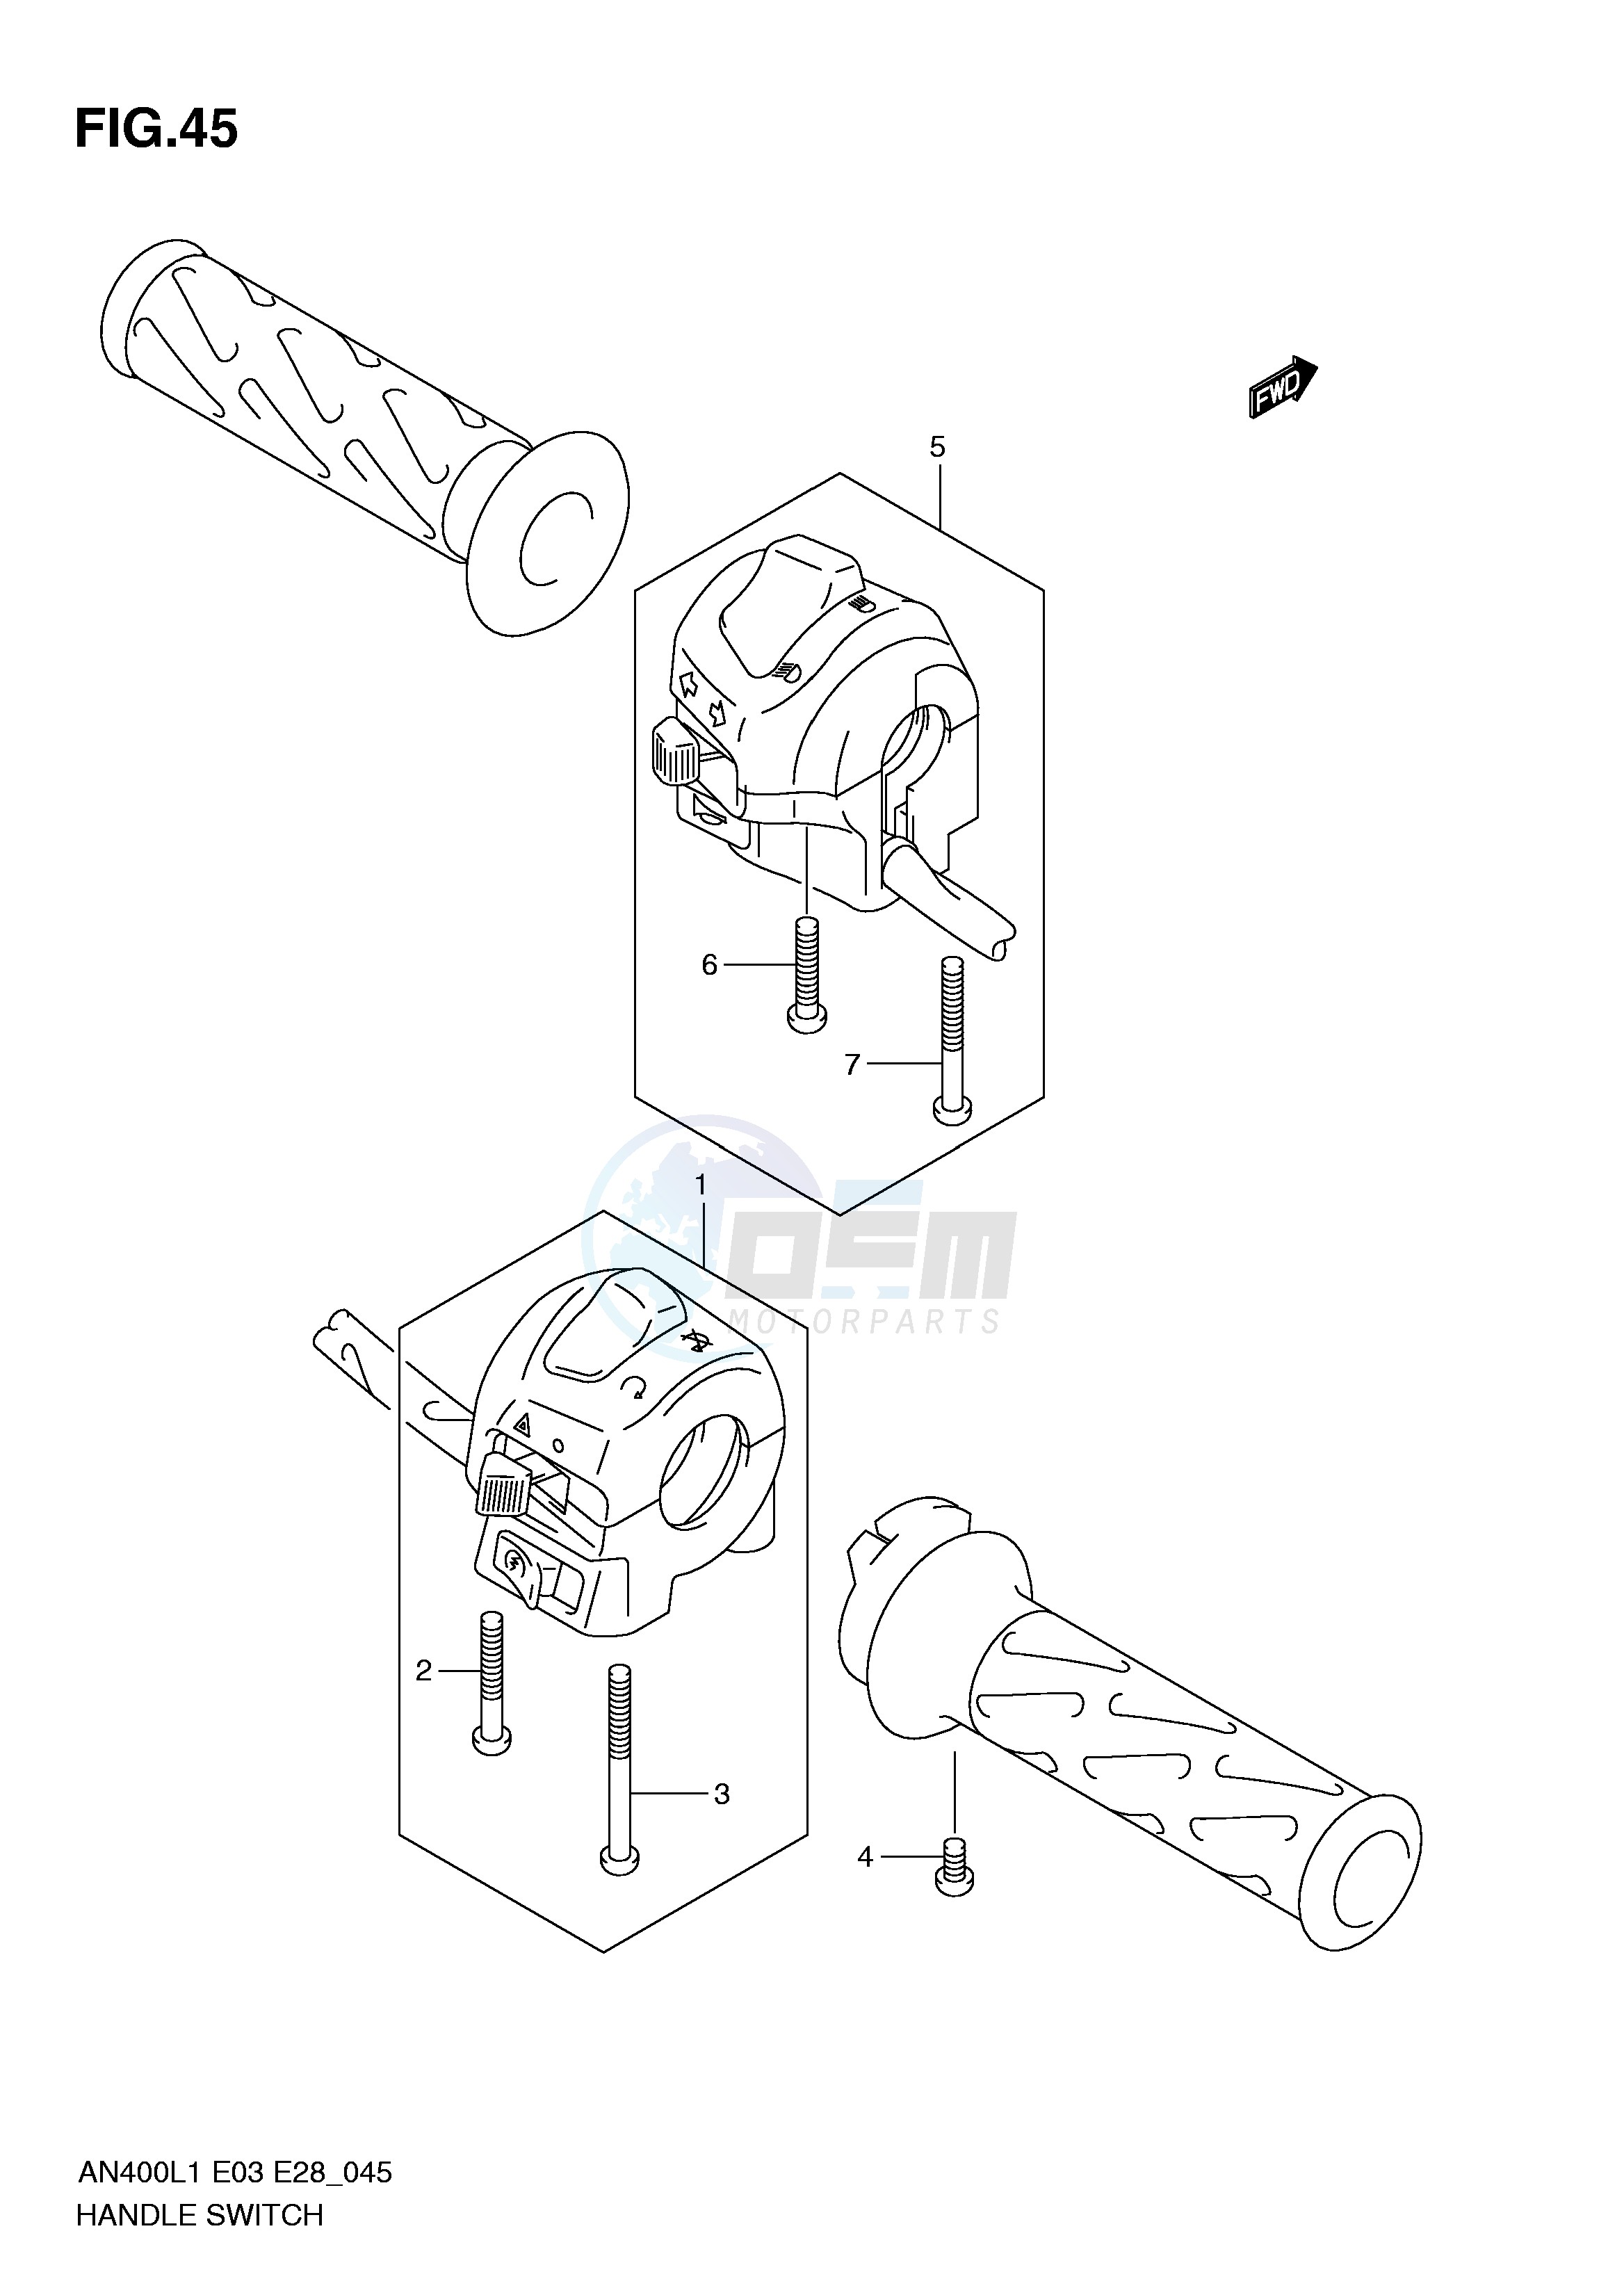 HANDLE SWITCH (AN400L1 E3) image